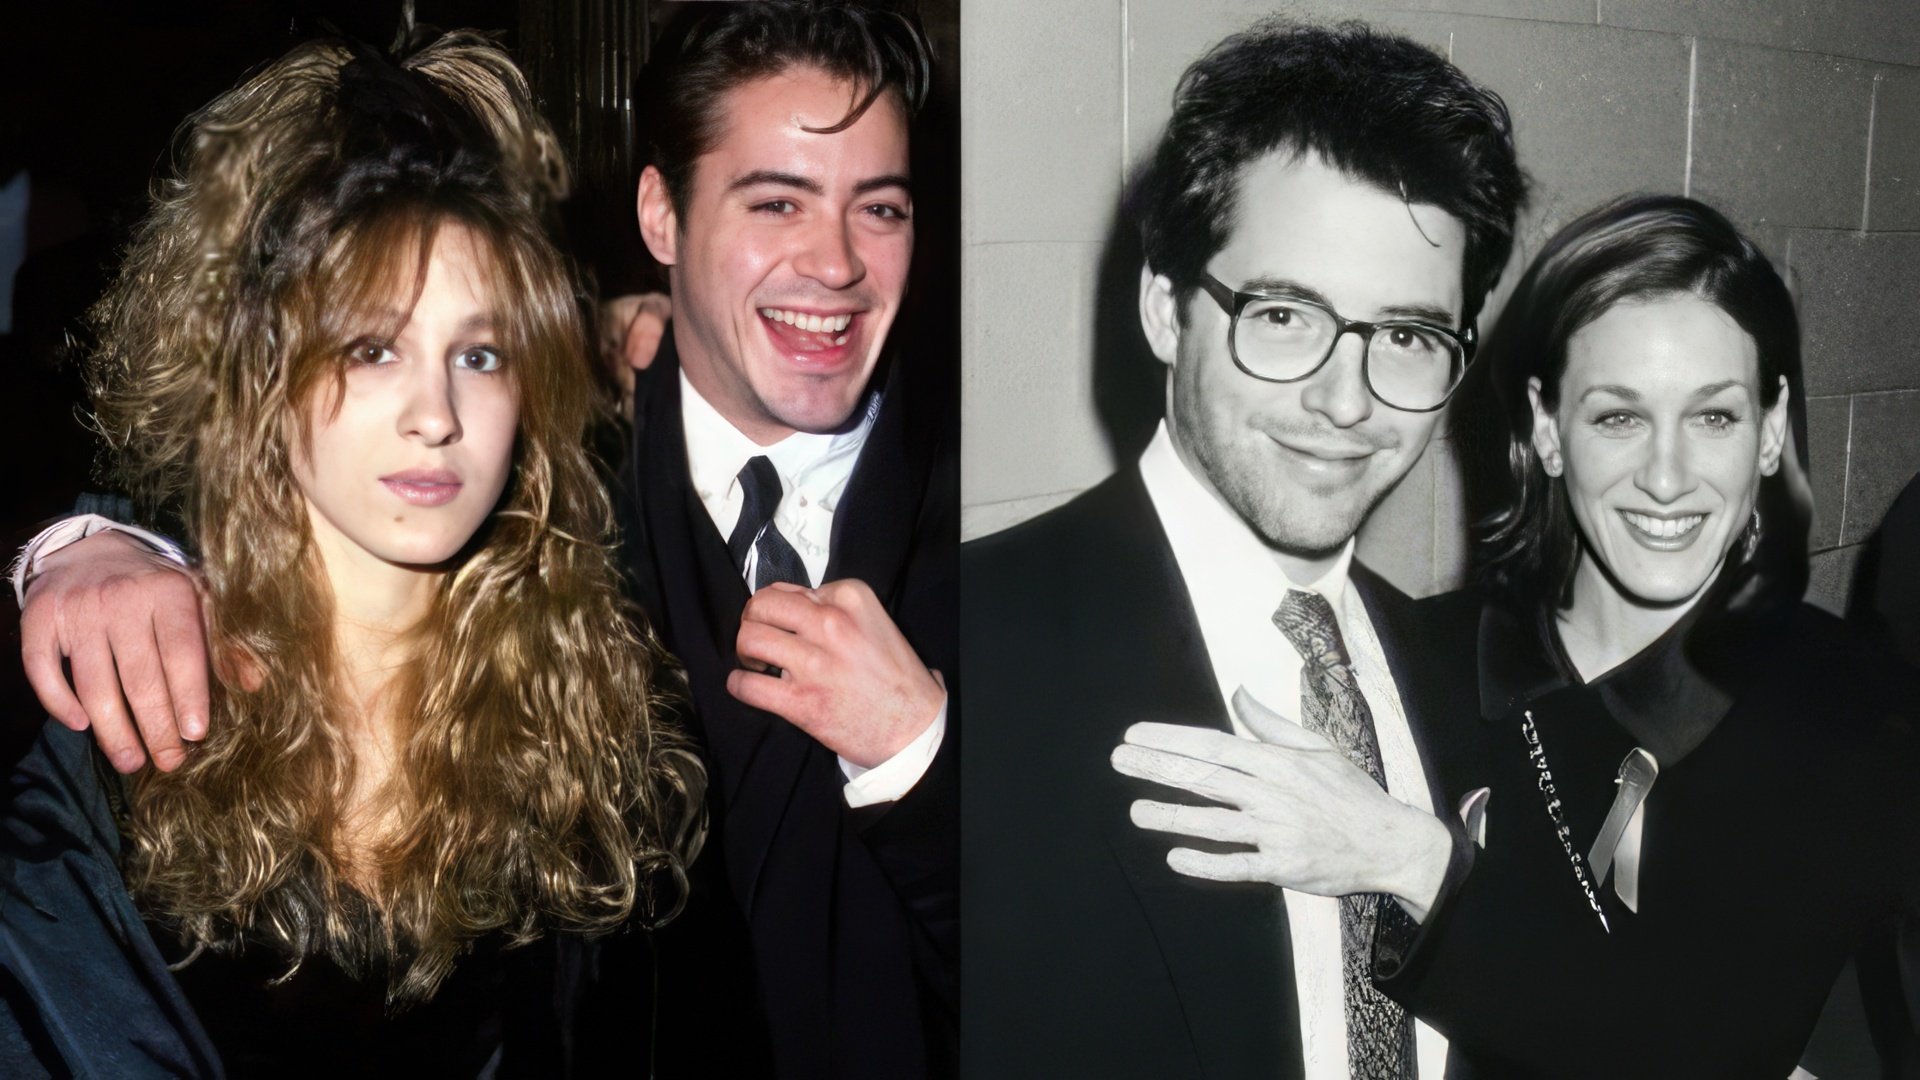 Sarah Jessica Parker and Robert Downey Jr. dated for 7 years